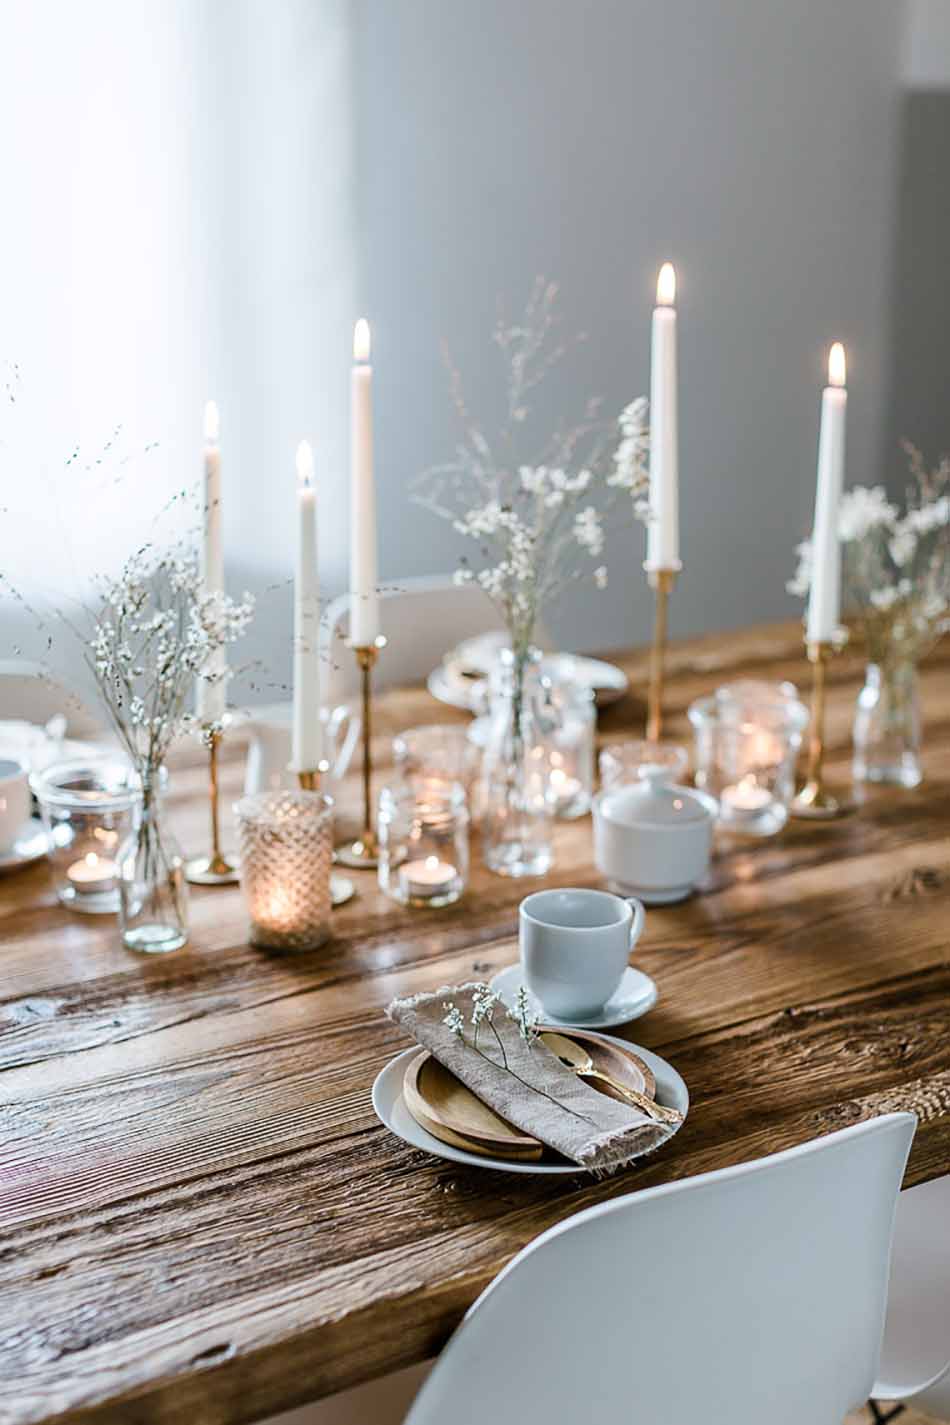 The Home Studio Winter Dining Inspiration